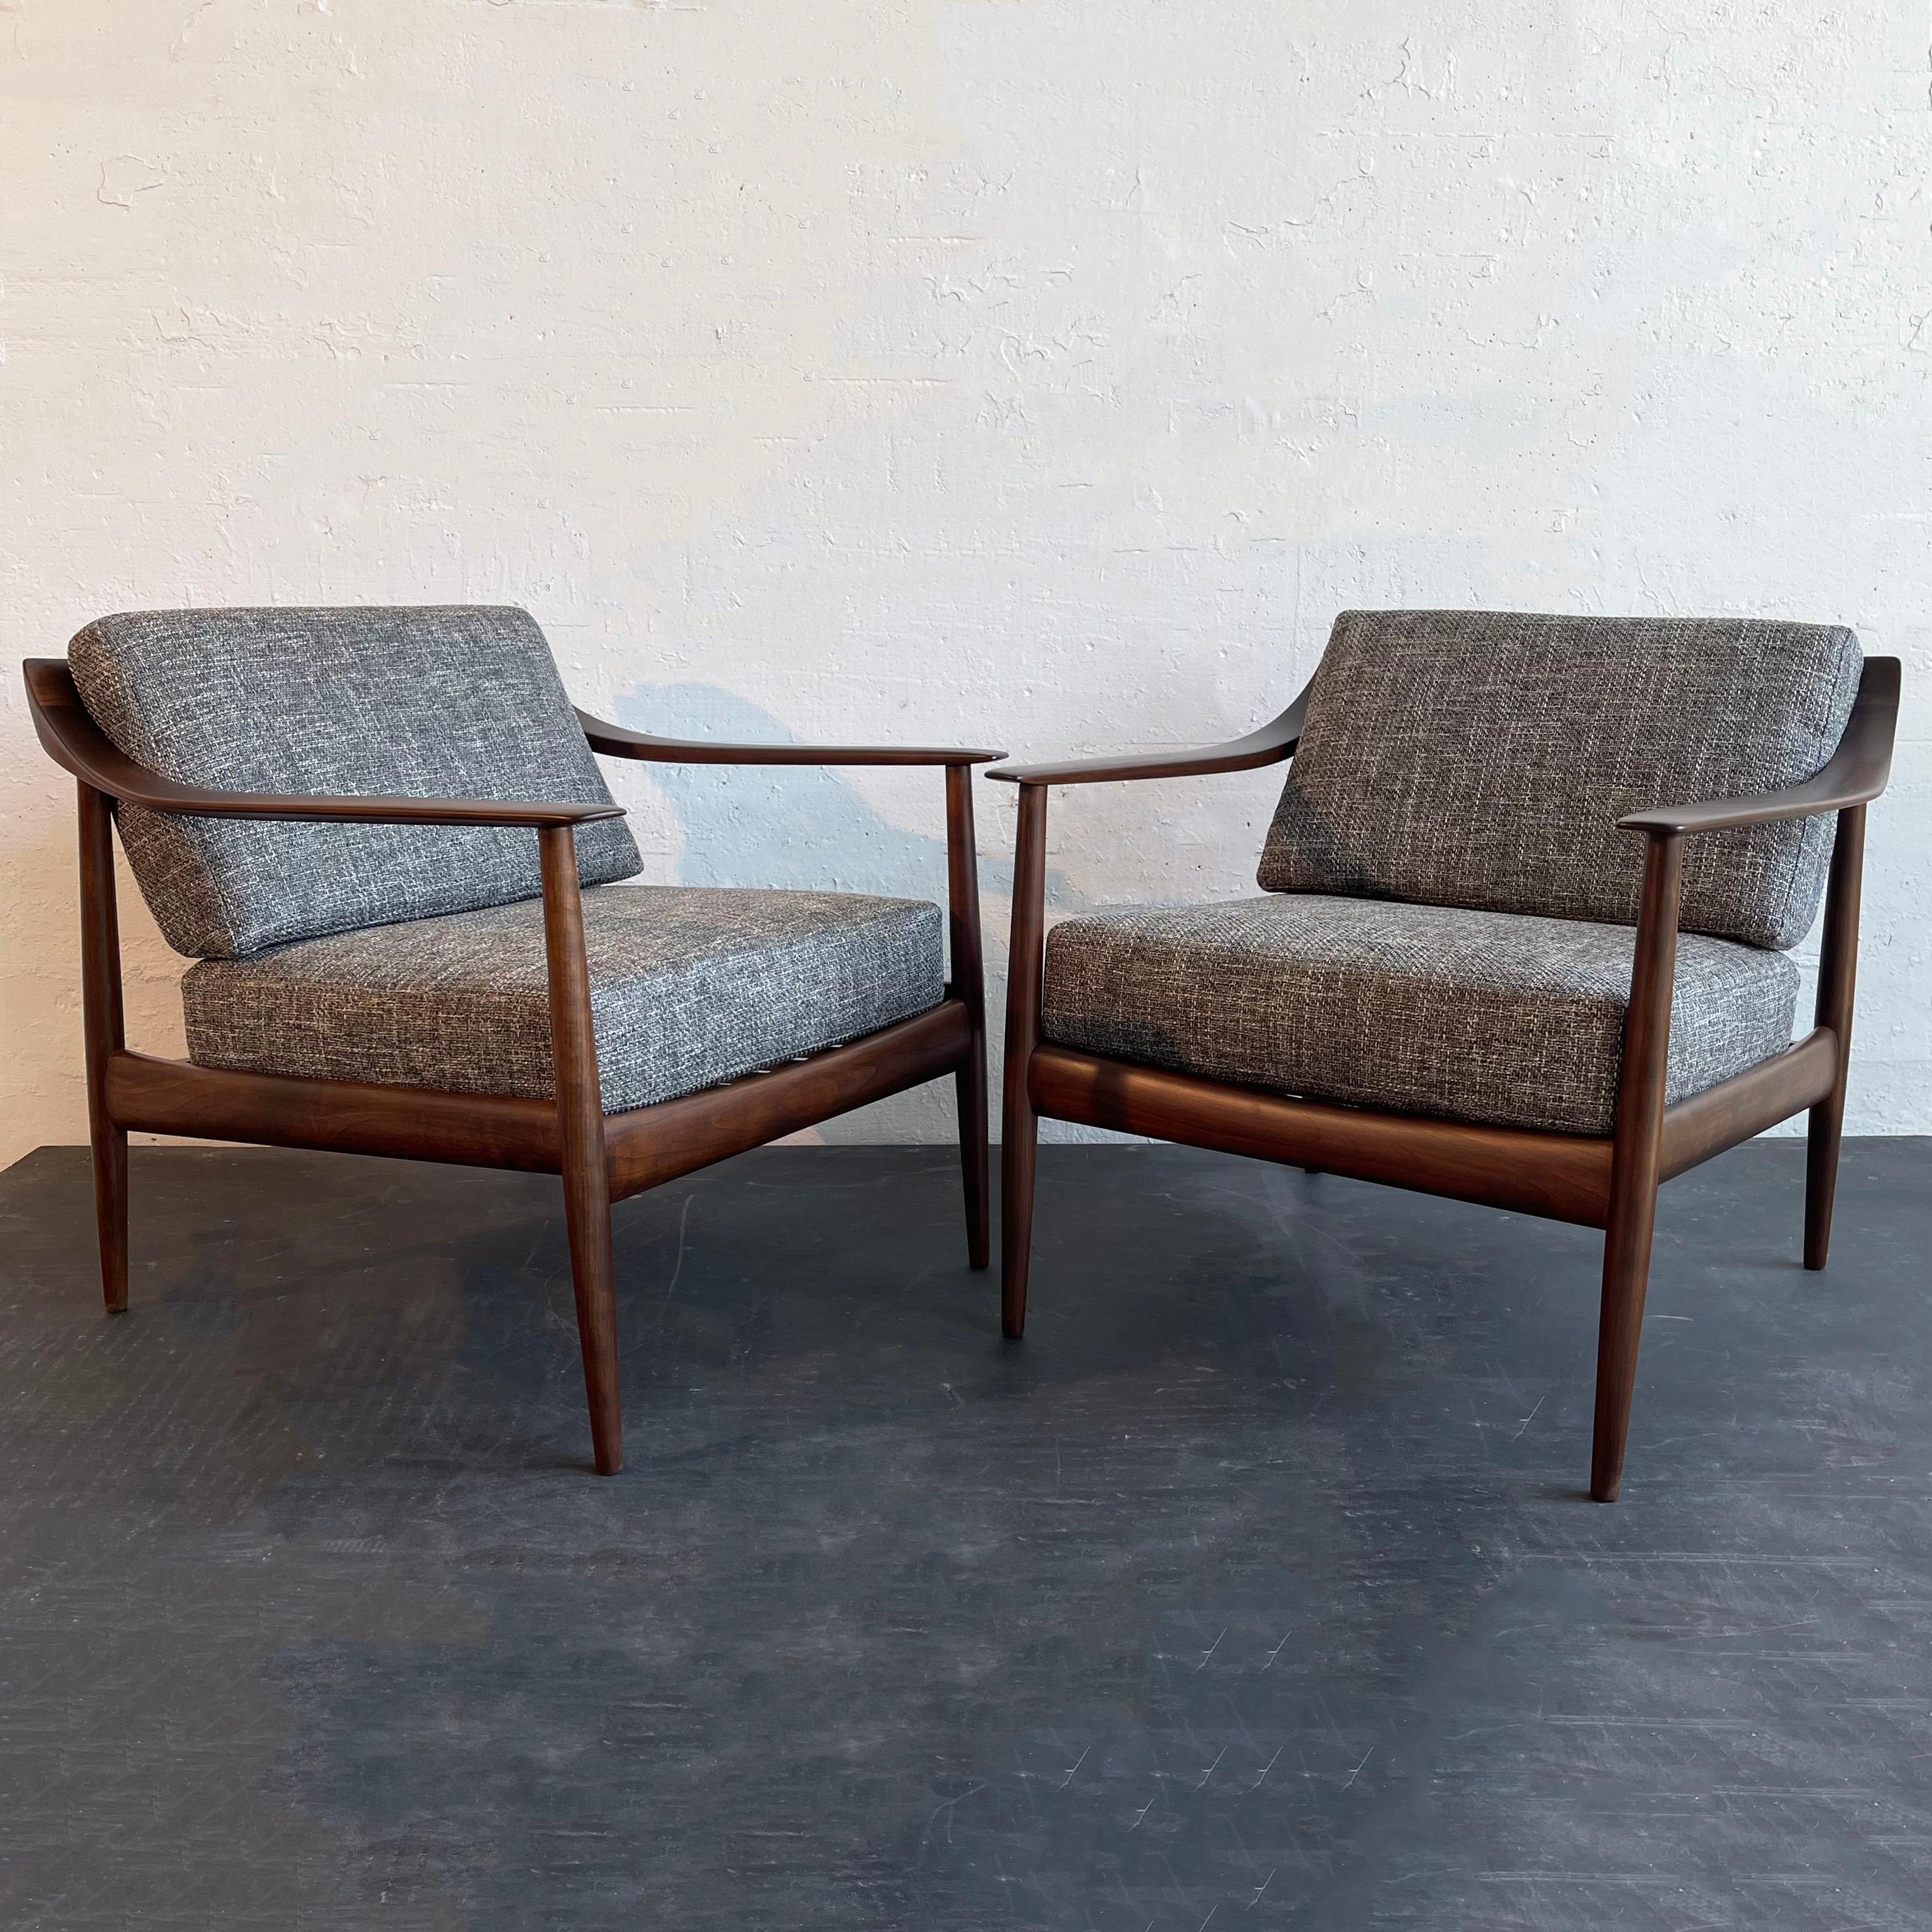 Pair of refined, mid-century modern, Knoll Antimott lounge chairs by German manufacturer Walter Knoll, father of Hans Knoll, founder of Knoll Inc. The chairs feature sleek, minimal walnut frames with sculpted, scoop arms. The seat and back cushions